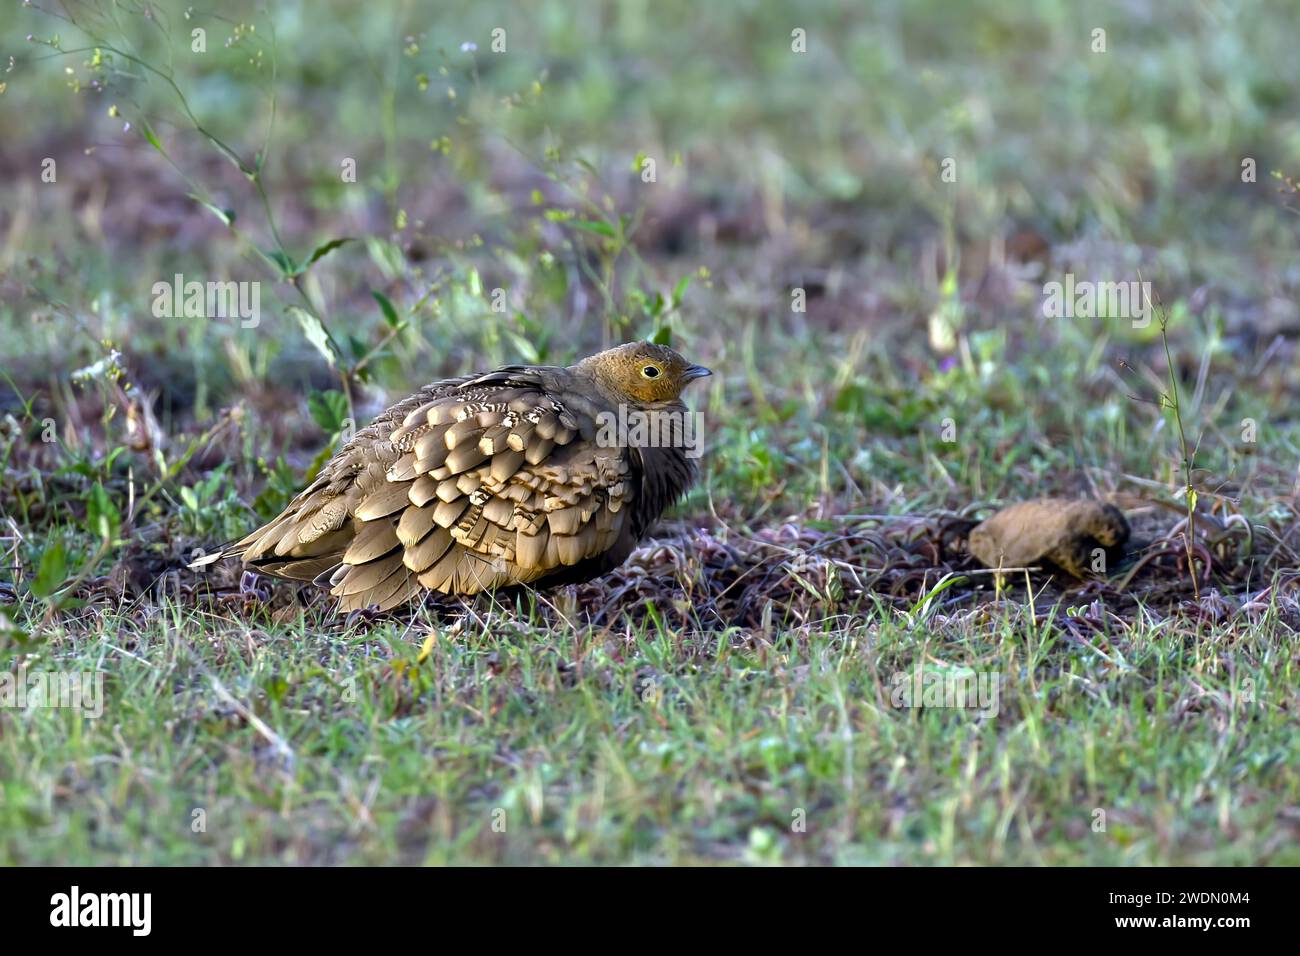 An avian species, characterized by vibrant yellow and brown plumage, is captured in a natural habitat amidst a lush bed of verdant grass Stock Photo